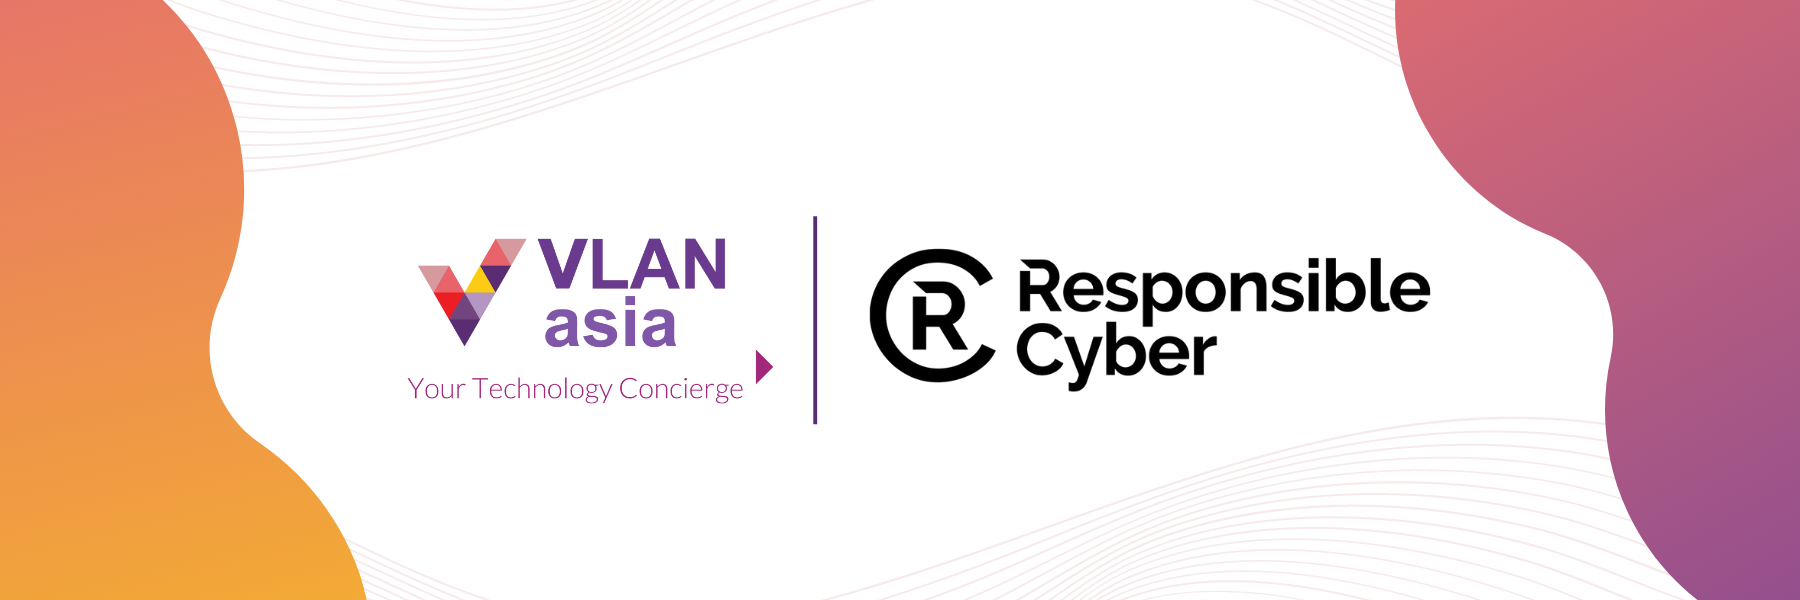 MoU between Vlan Asia and Responsible Cyber